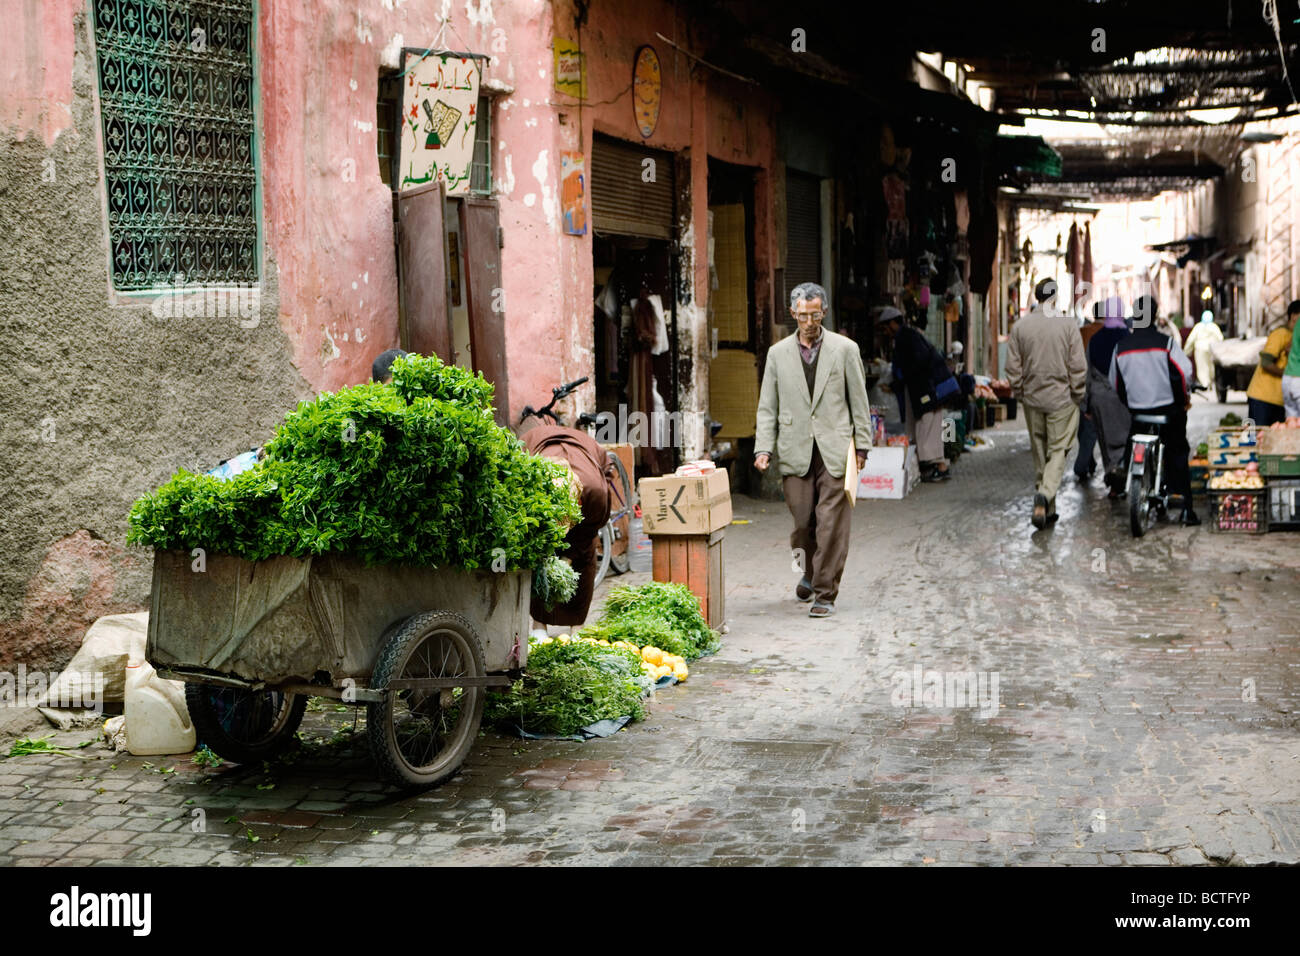 A cart full of fresh mint in a narrow market alley (souk or souq) in Medina, old town of Marrakech, Morocco. Stock Photo